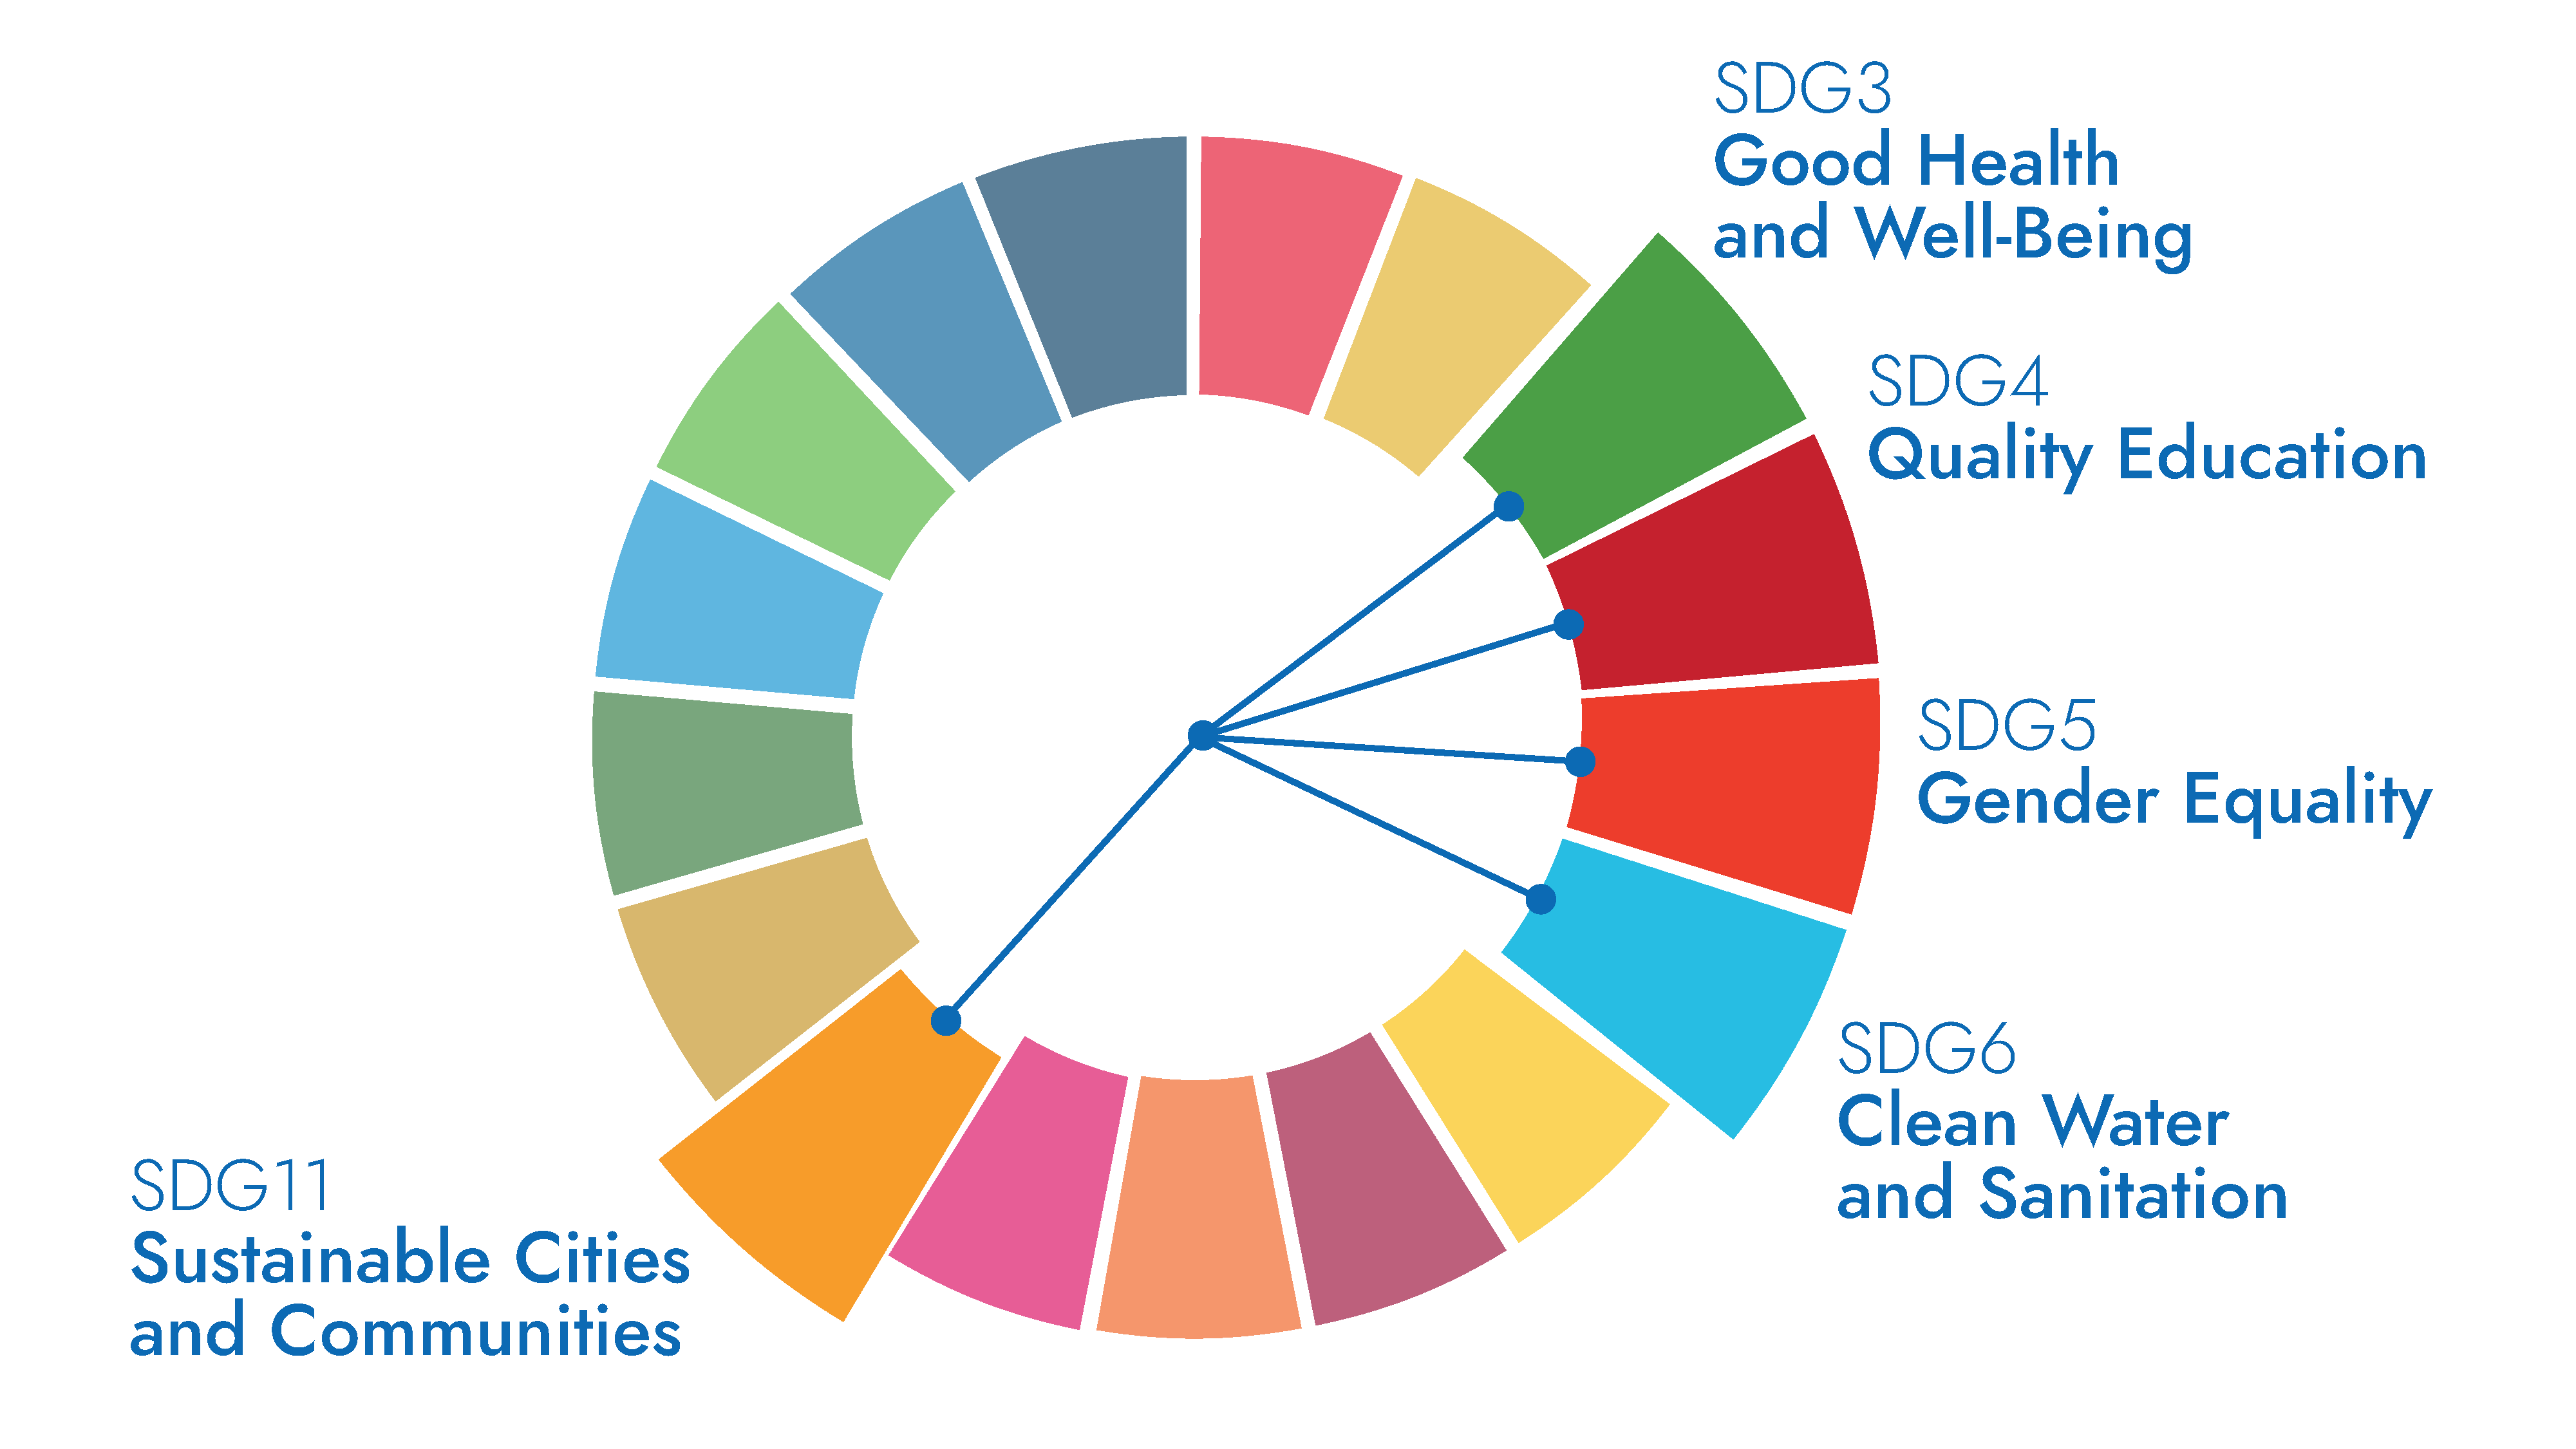 SDG wheel showing connections between toilets and SDG3, SDG4, SDG5, SDG6 and SDG11